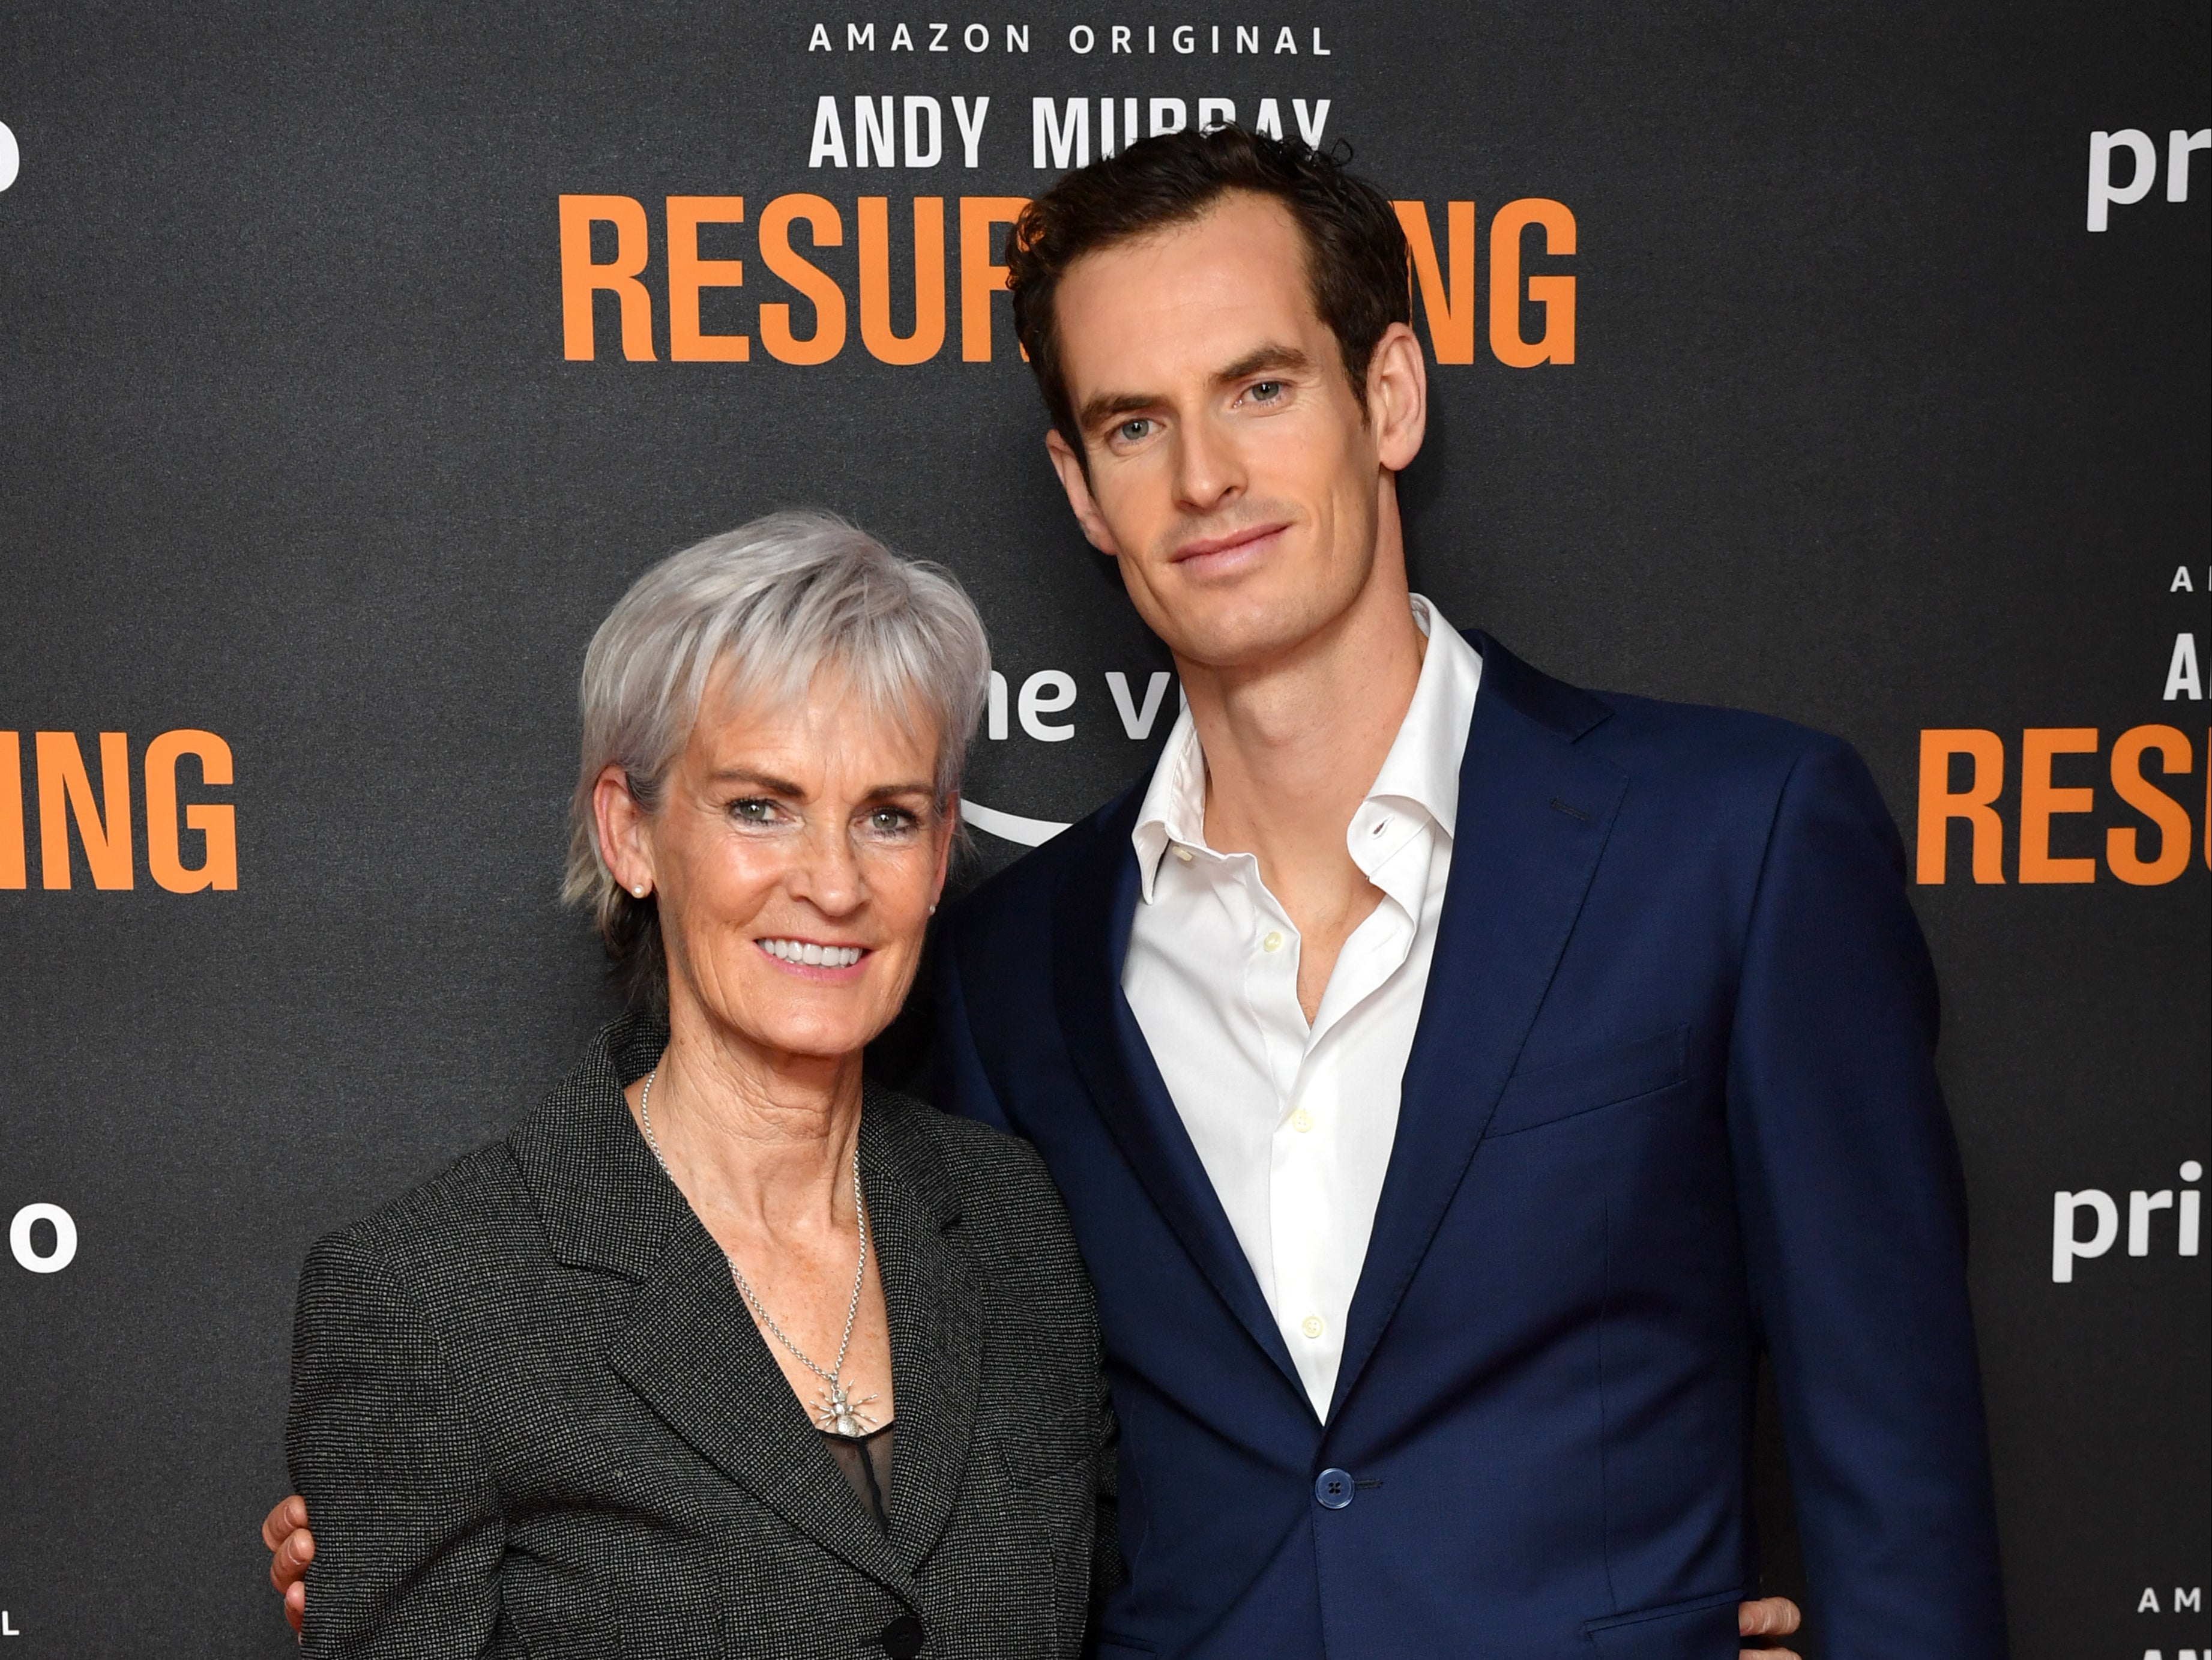 judy murray, andy murray, queen's, wimbledon, judy murray hits out after son andy’s ‘medical details leaked’ before wimbledon